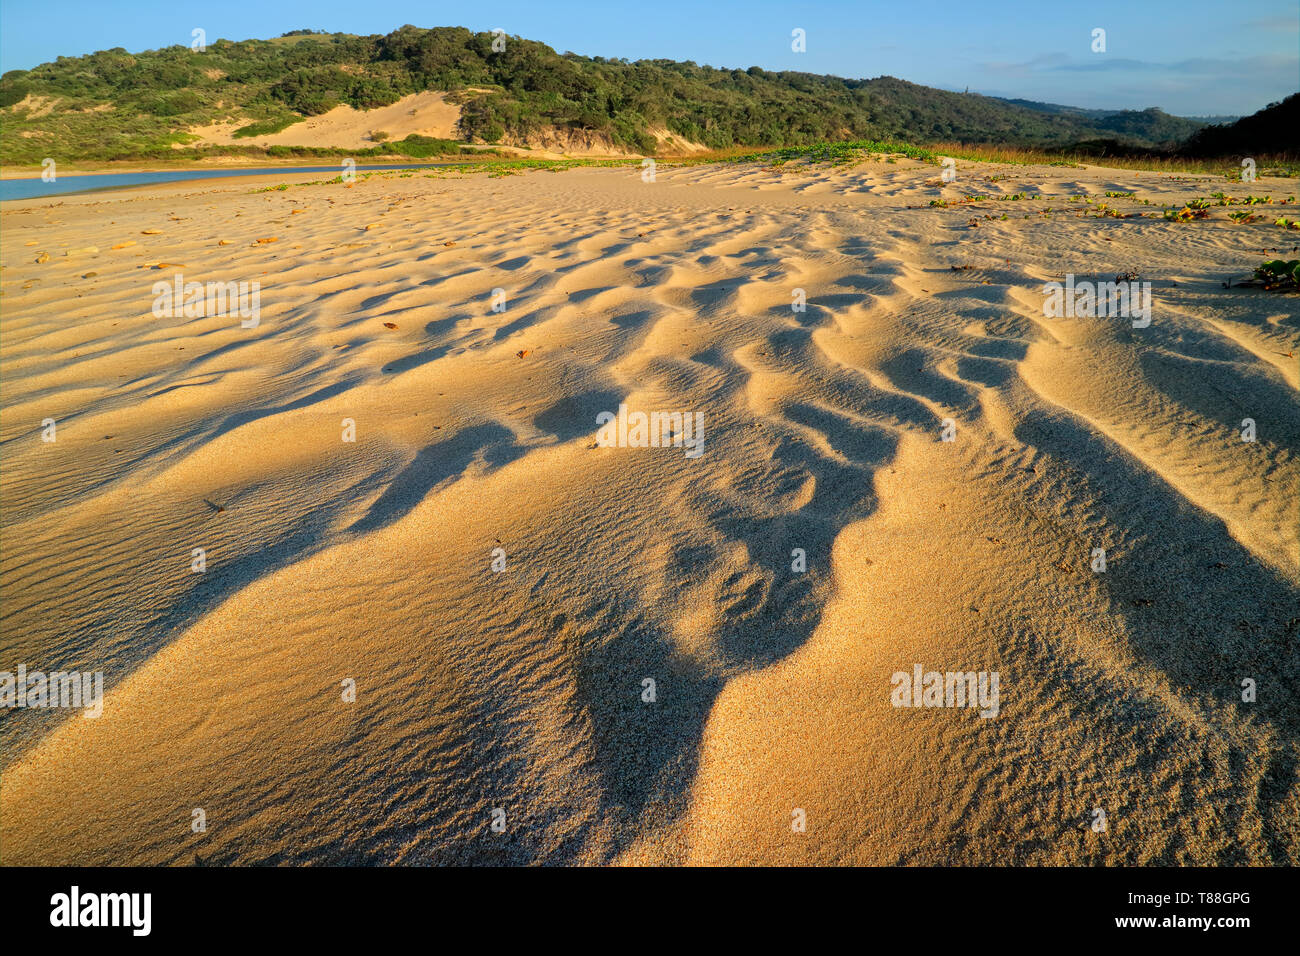 Scenic beach early morning with wind-blown patterns in the sand, South Africa Stock Photo